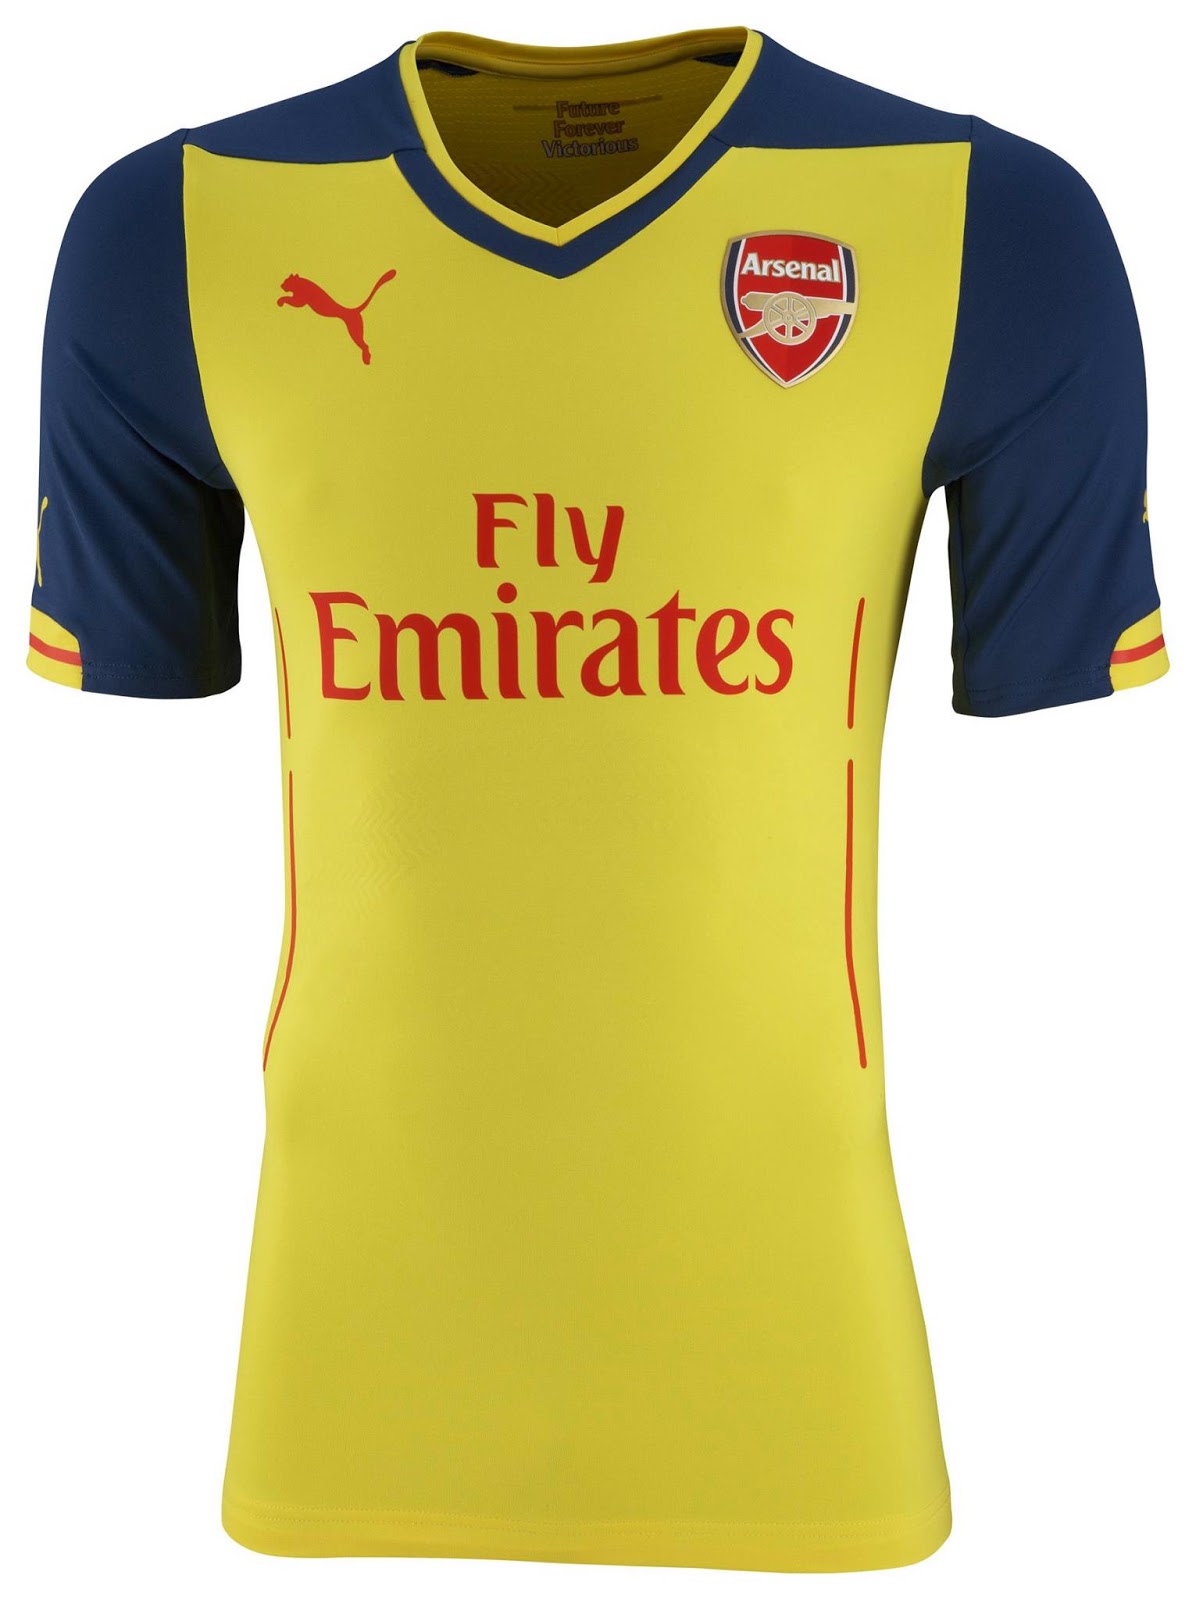 All 20 New Premier League Away Shirts Rated: Man United And Arsenal